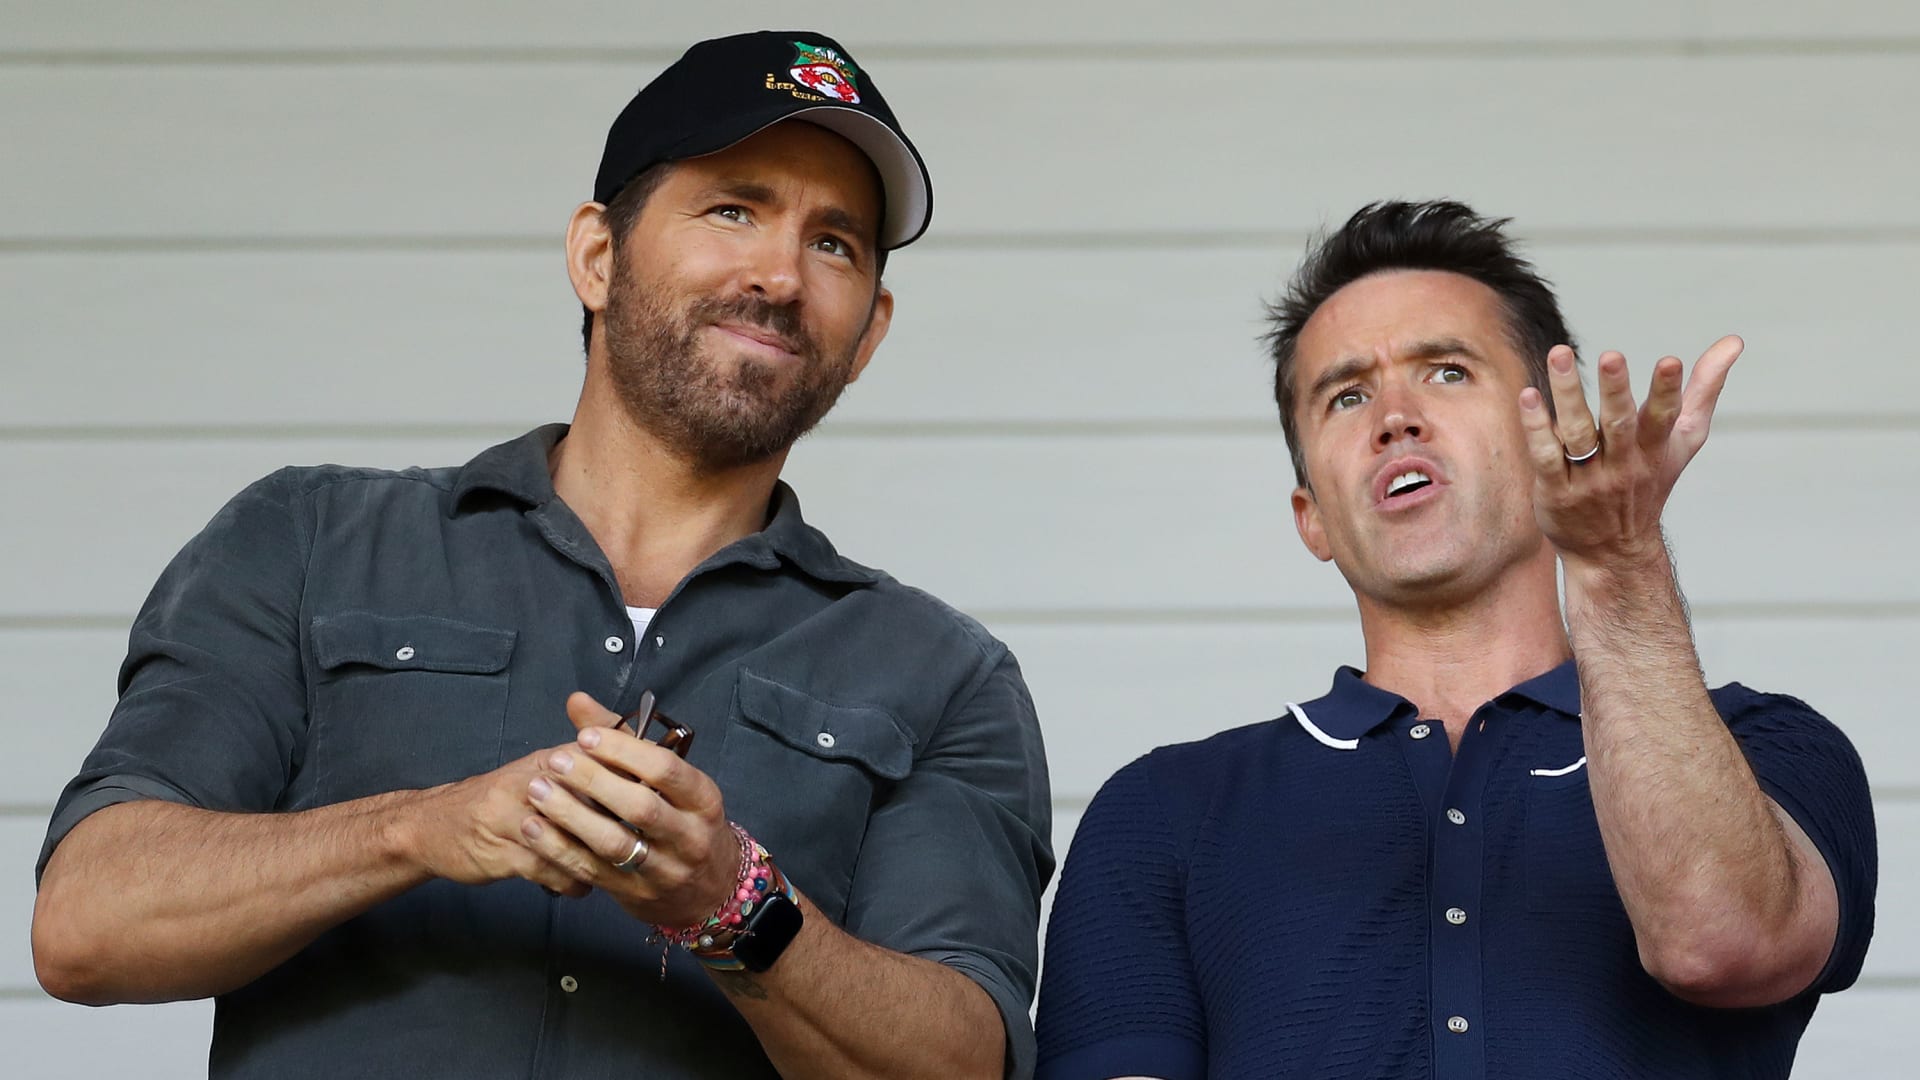 Ryan Reynolds and Rob McElhenney, co-owners of Wrexham, react prior to the Vanarama National League Play-Off Semi Final match between Wrexham and Grimsby Town.